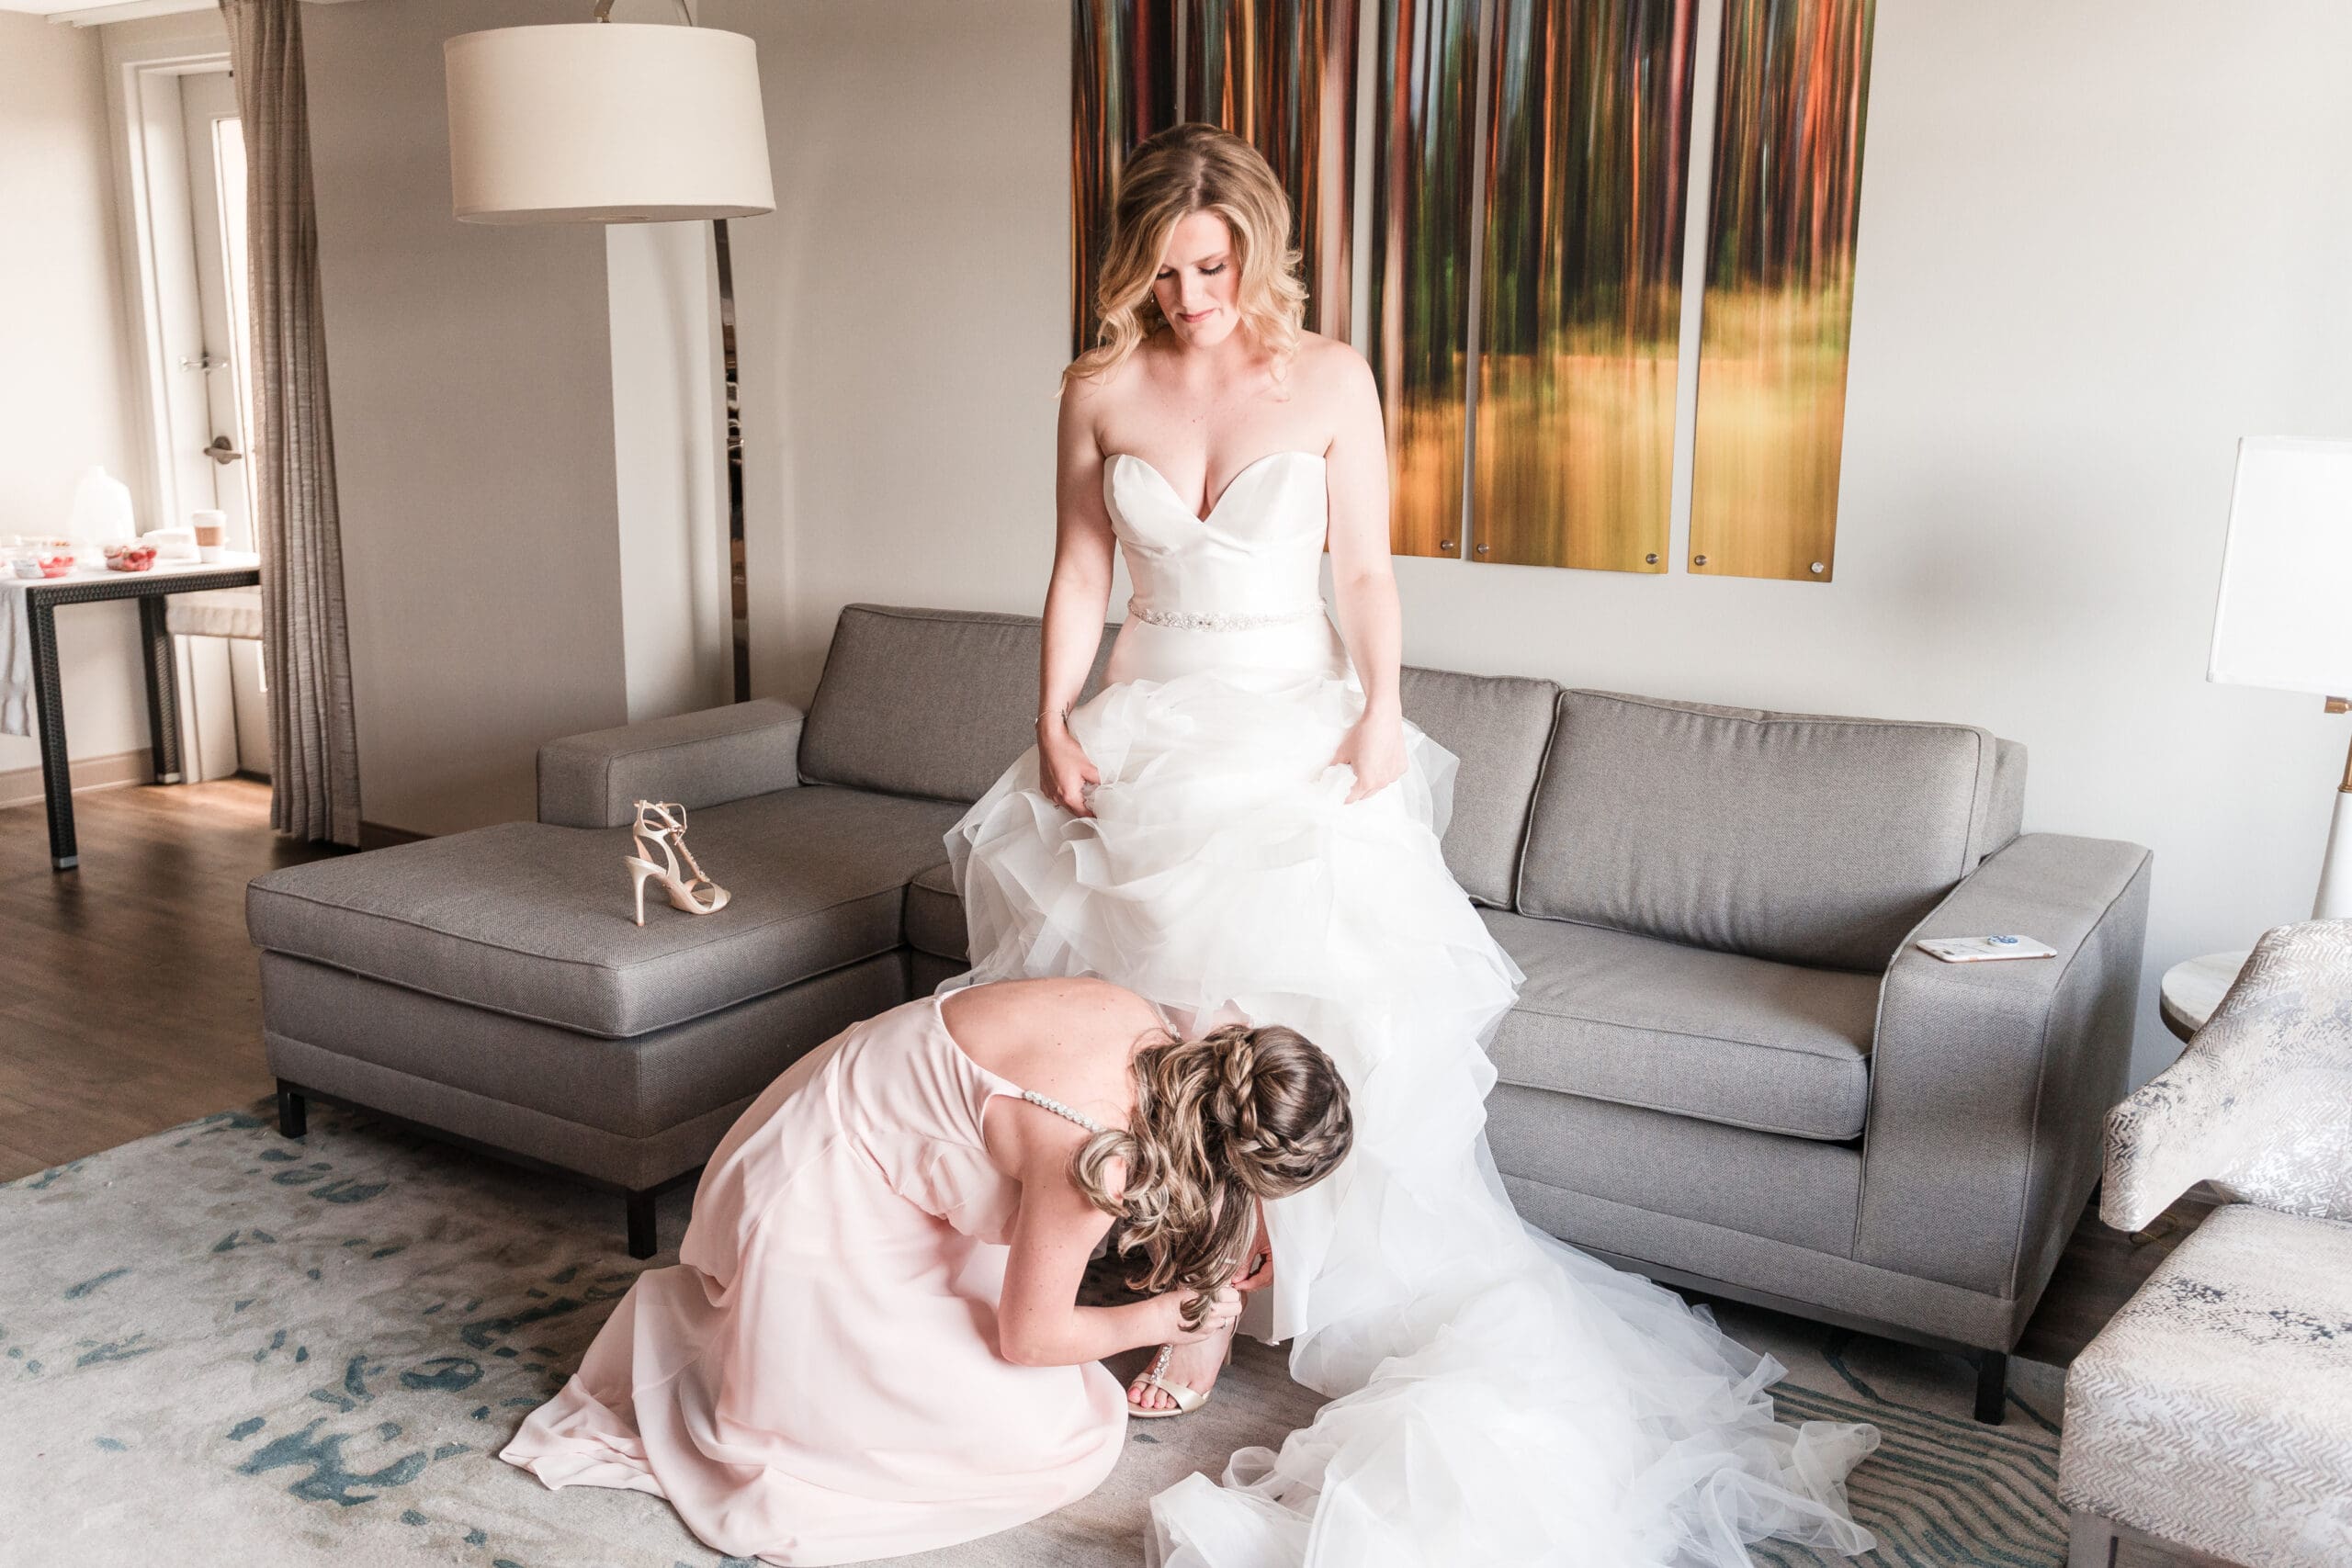 Bridesmaid helping the bride with her dress adjustments and heels as they get ready for the big day, captured in this pre-wedding photo by Jerzy Nieves Photography.